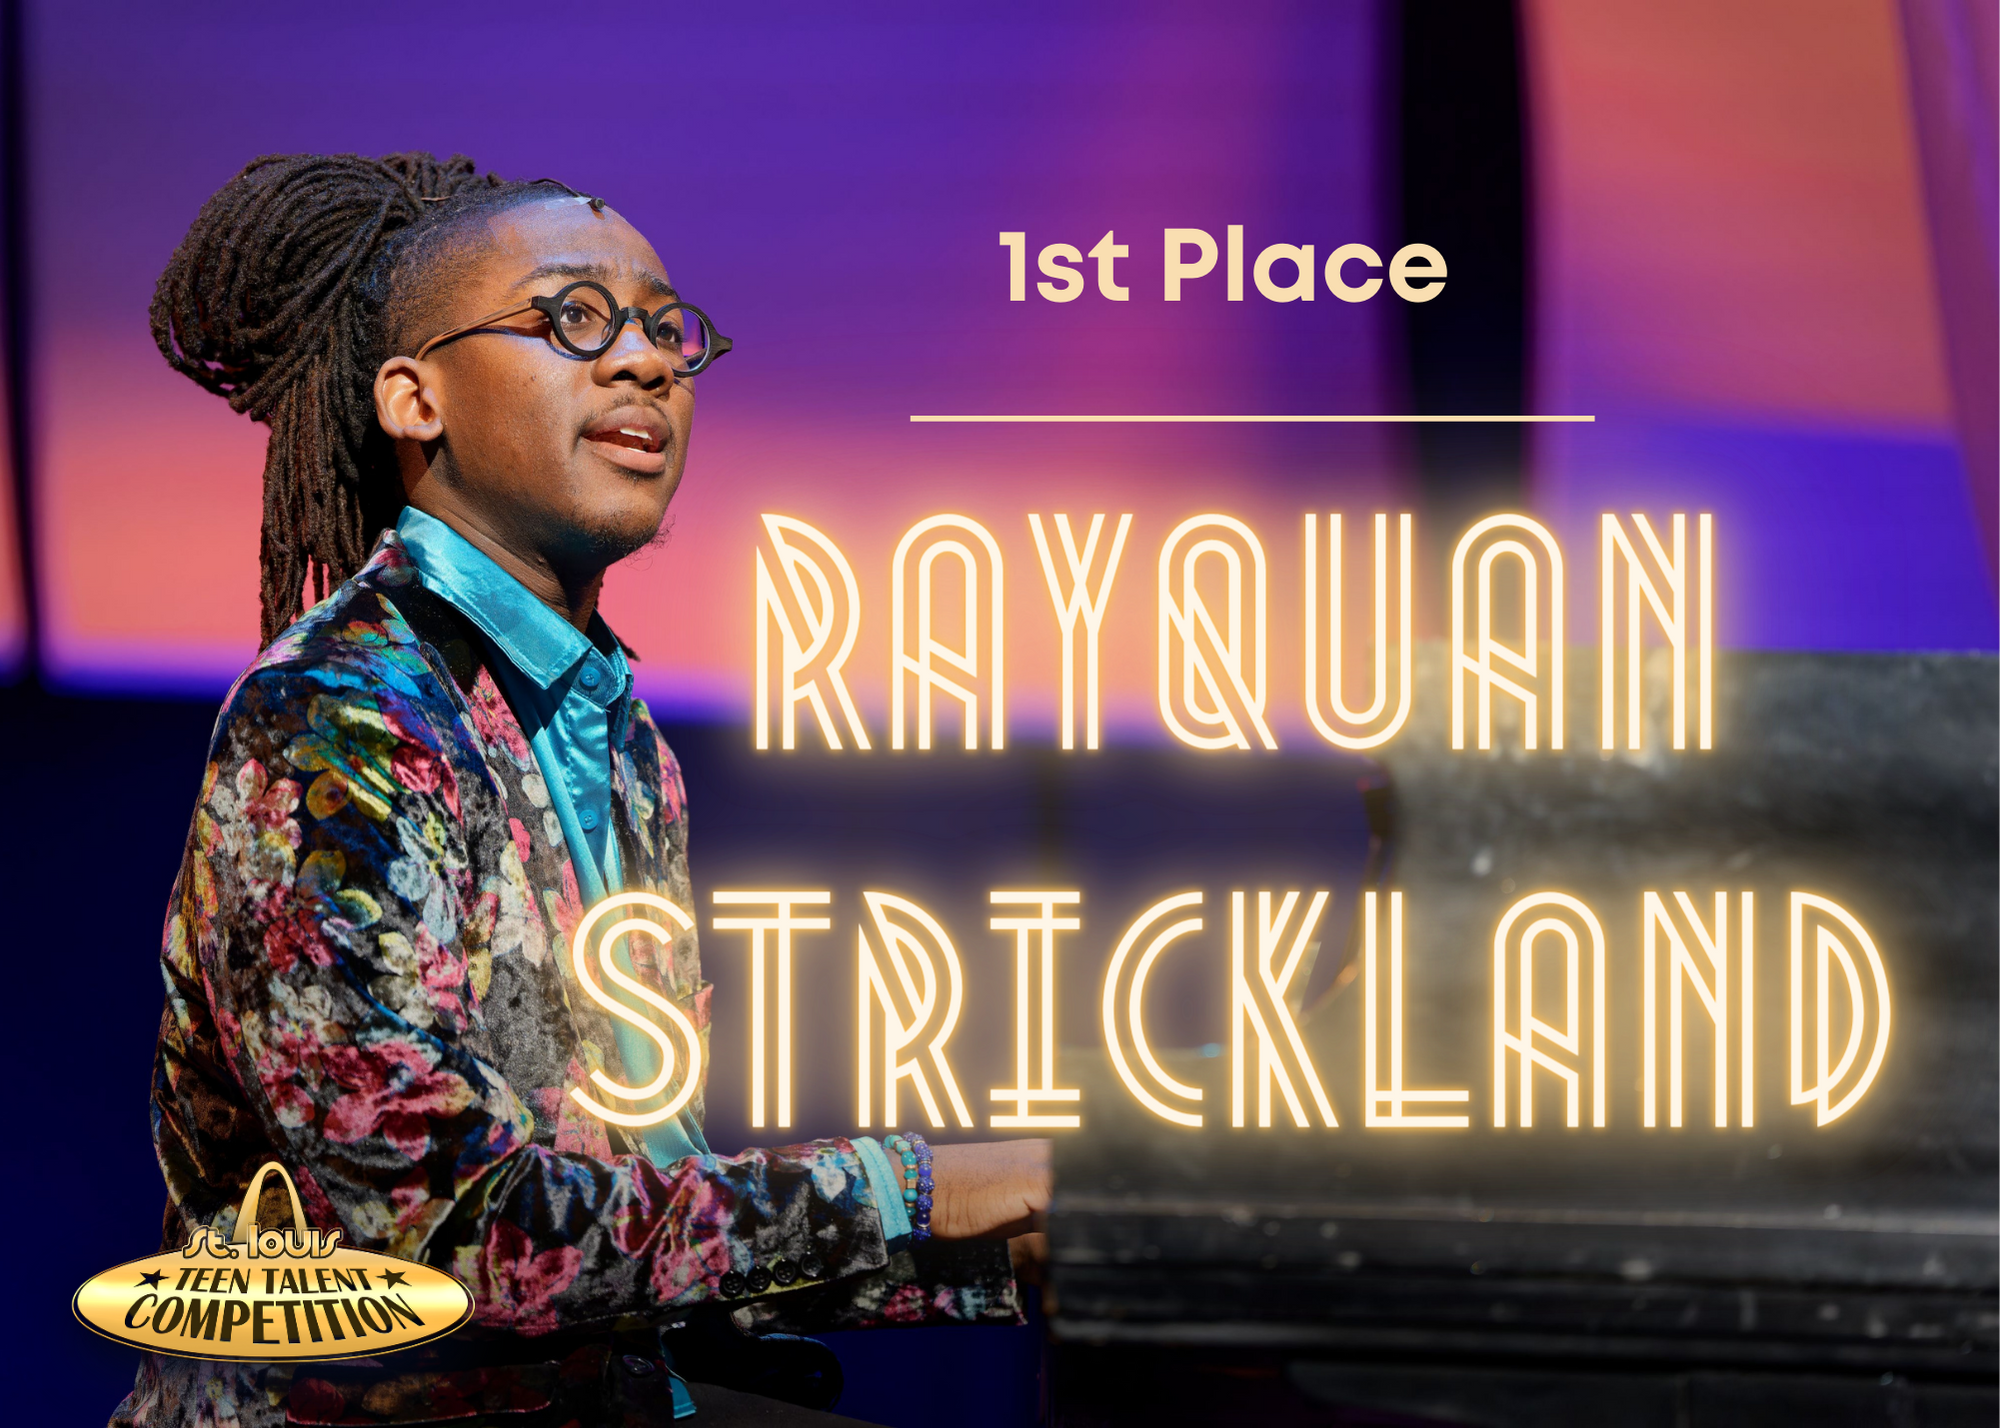 Rayquan Strickland Winner 1st place of 2023 Teen Talent Competition